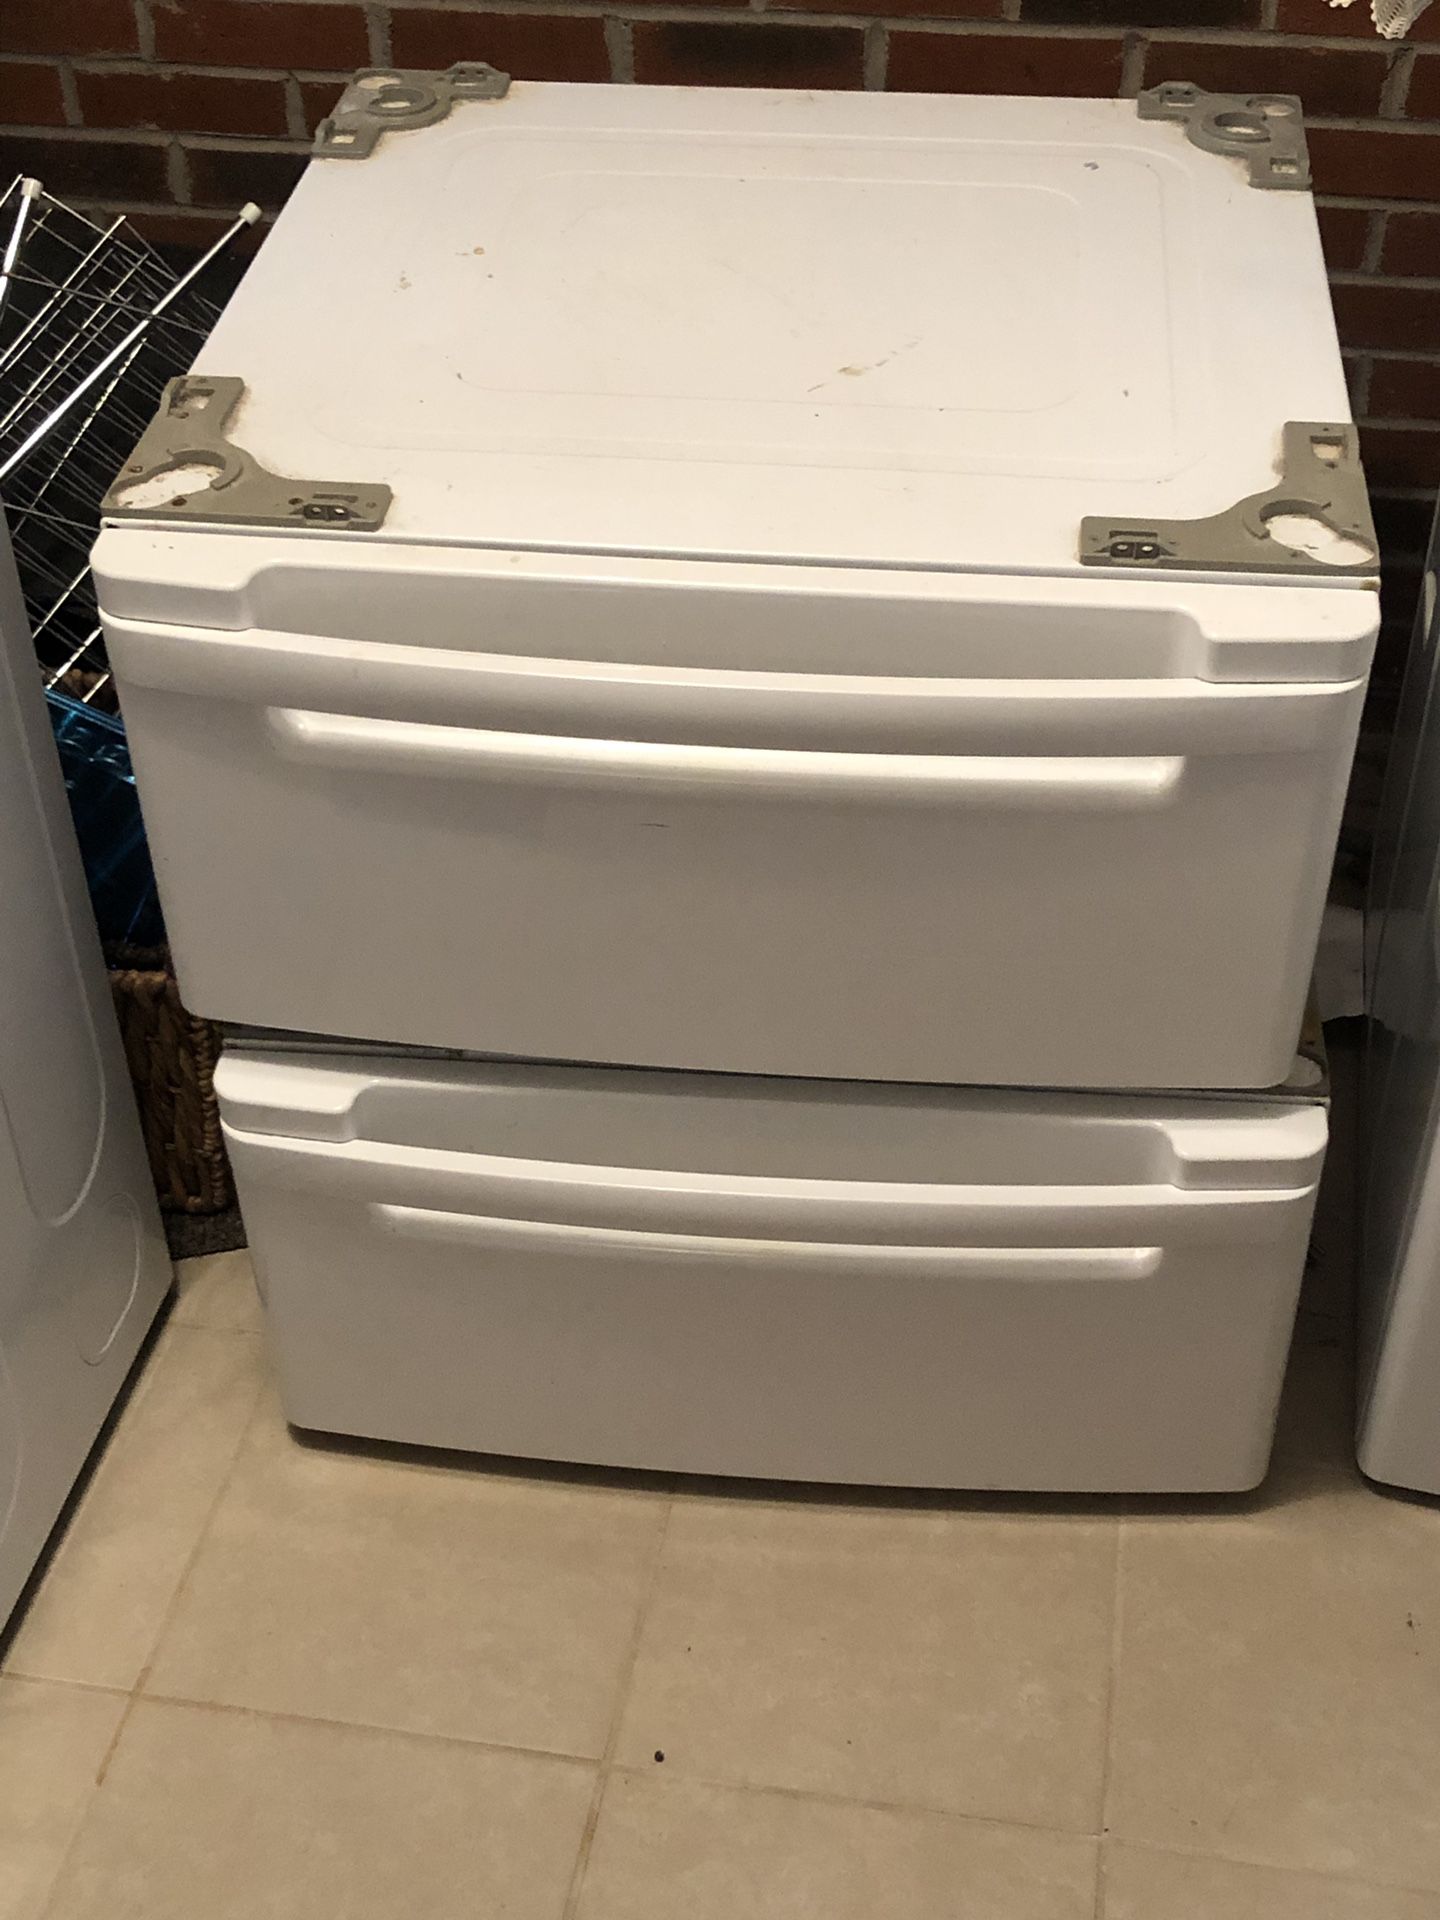 Washer and dryer stands